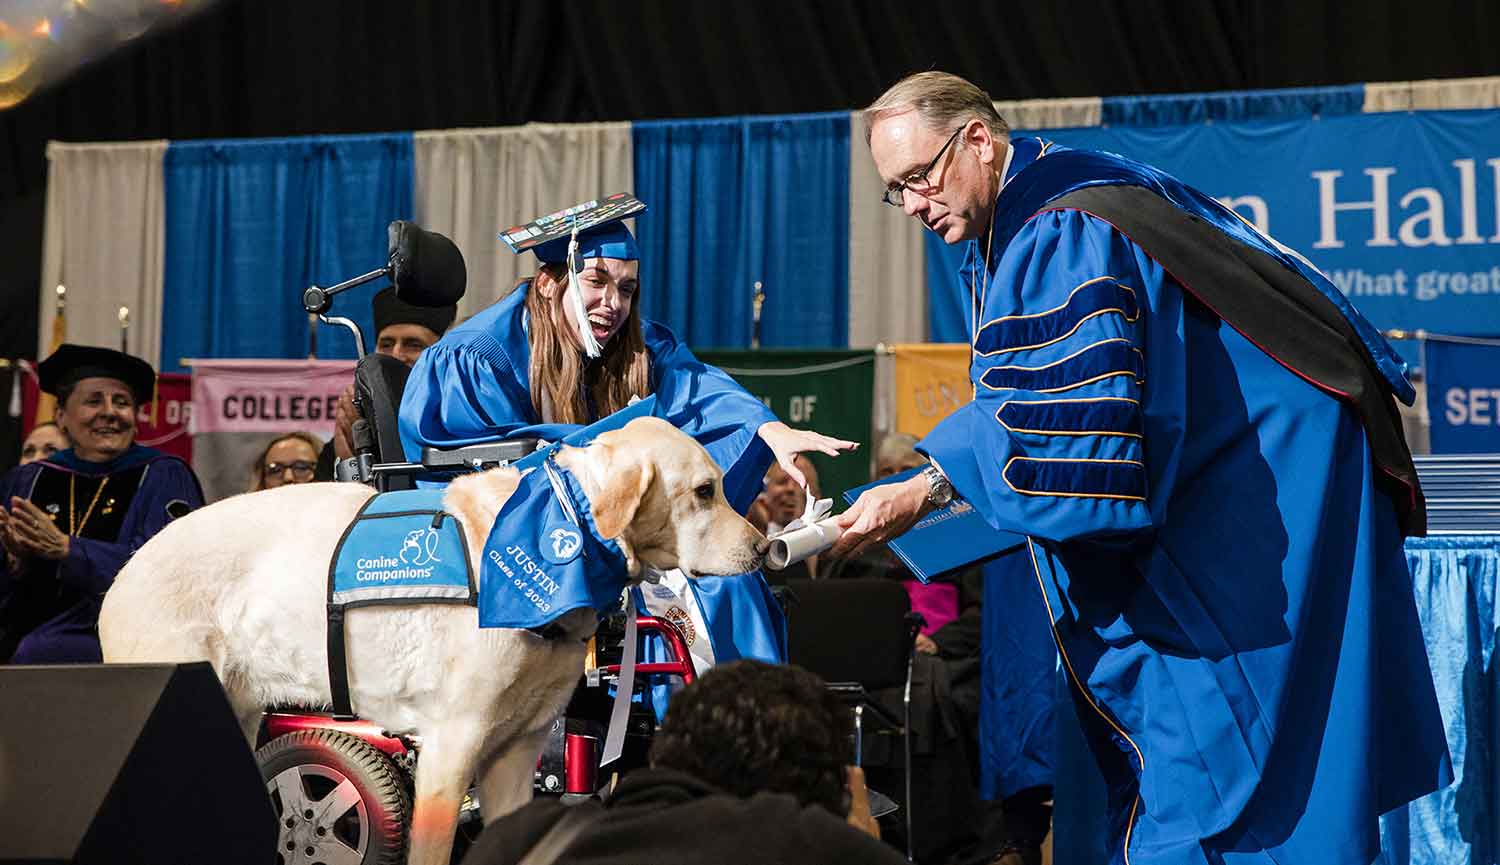 A golden retriever and lab mix dog in a Canine Companions vest sniffs a diploma held out by a man in an academic robe as a woman sitting in a wheelchair and wearing a cap and gown smiles.